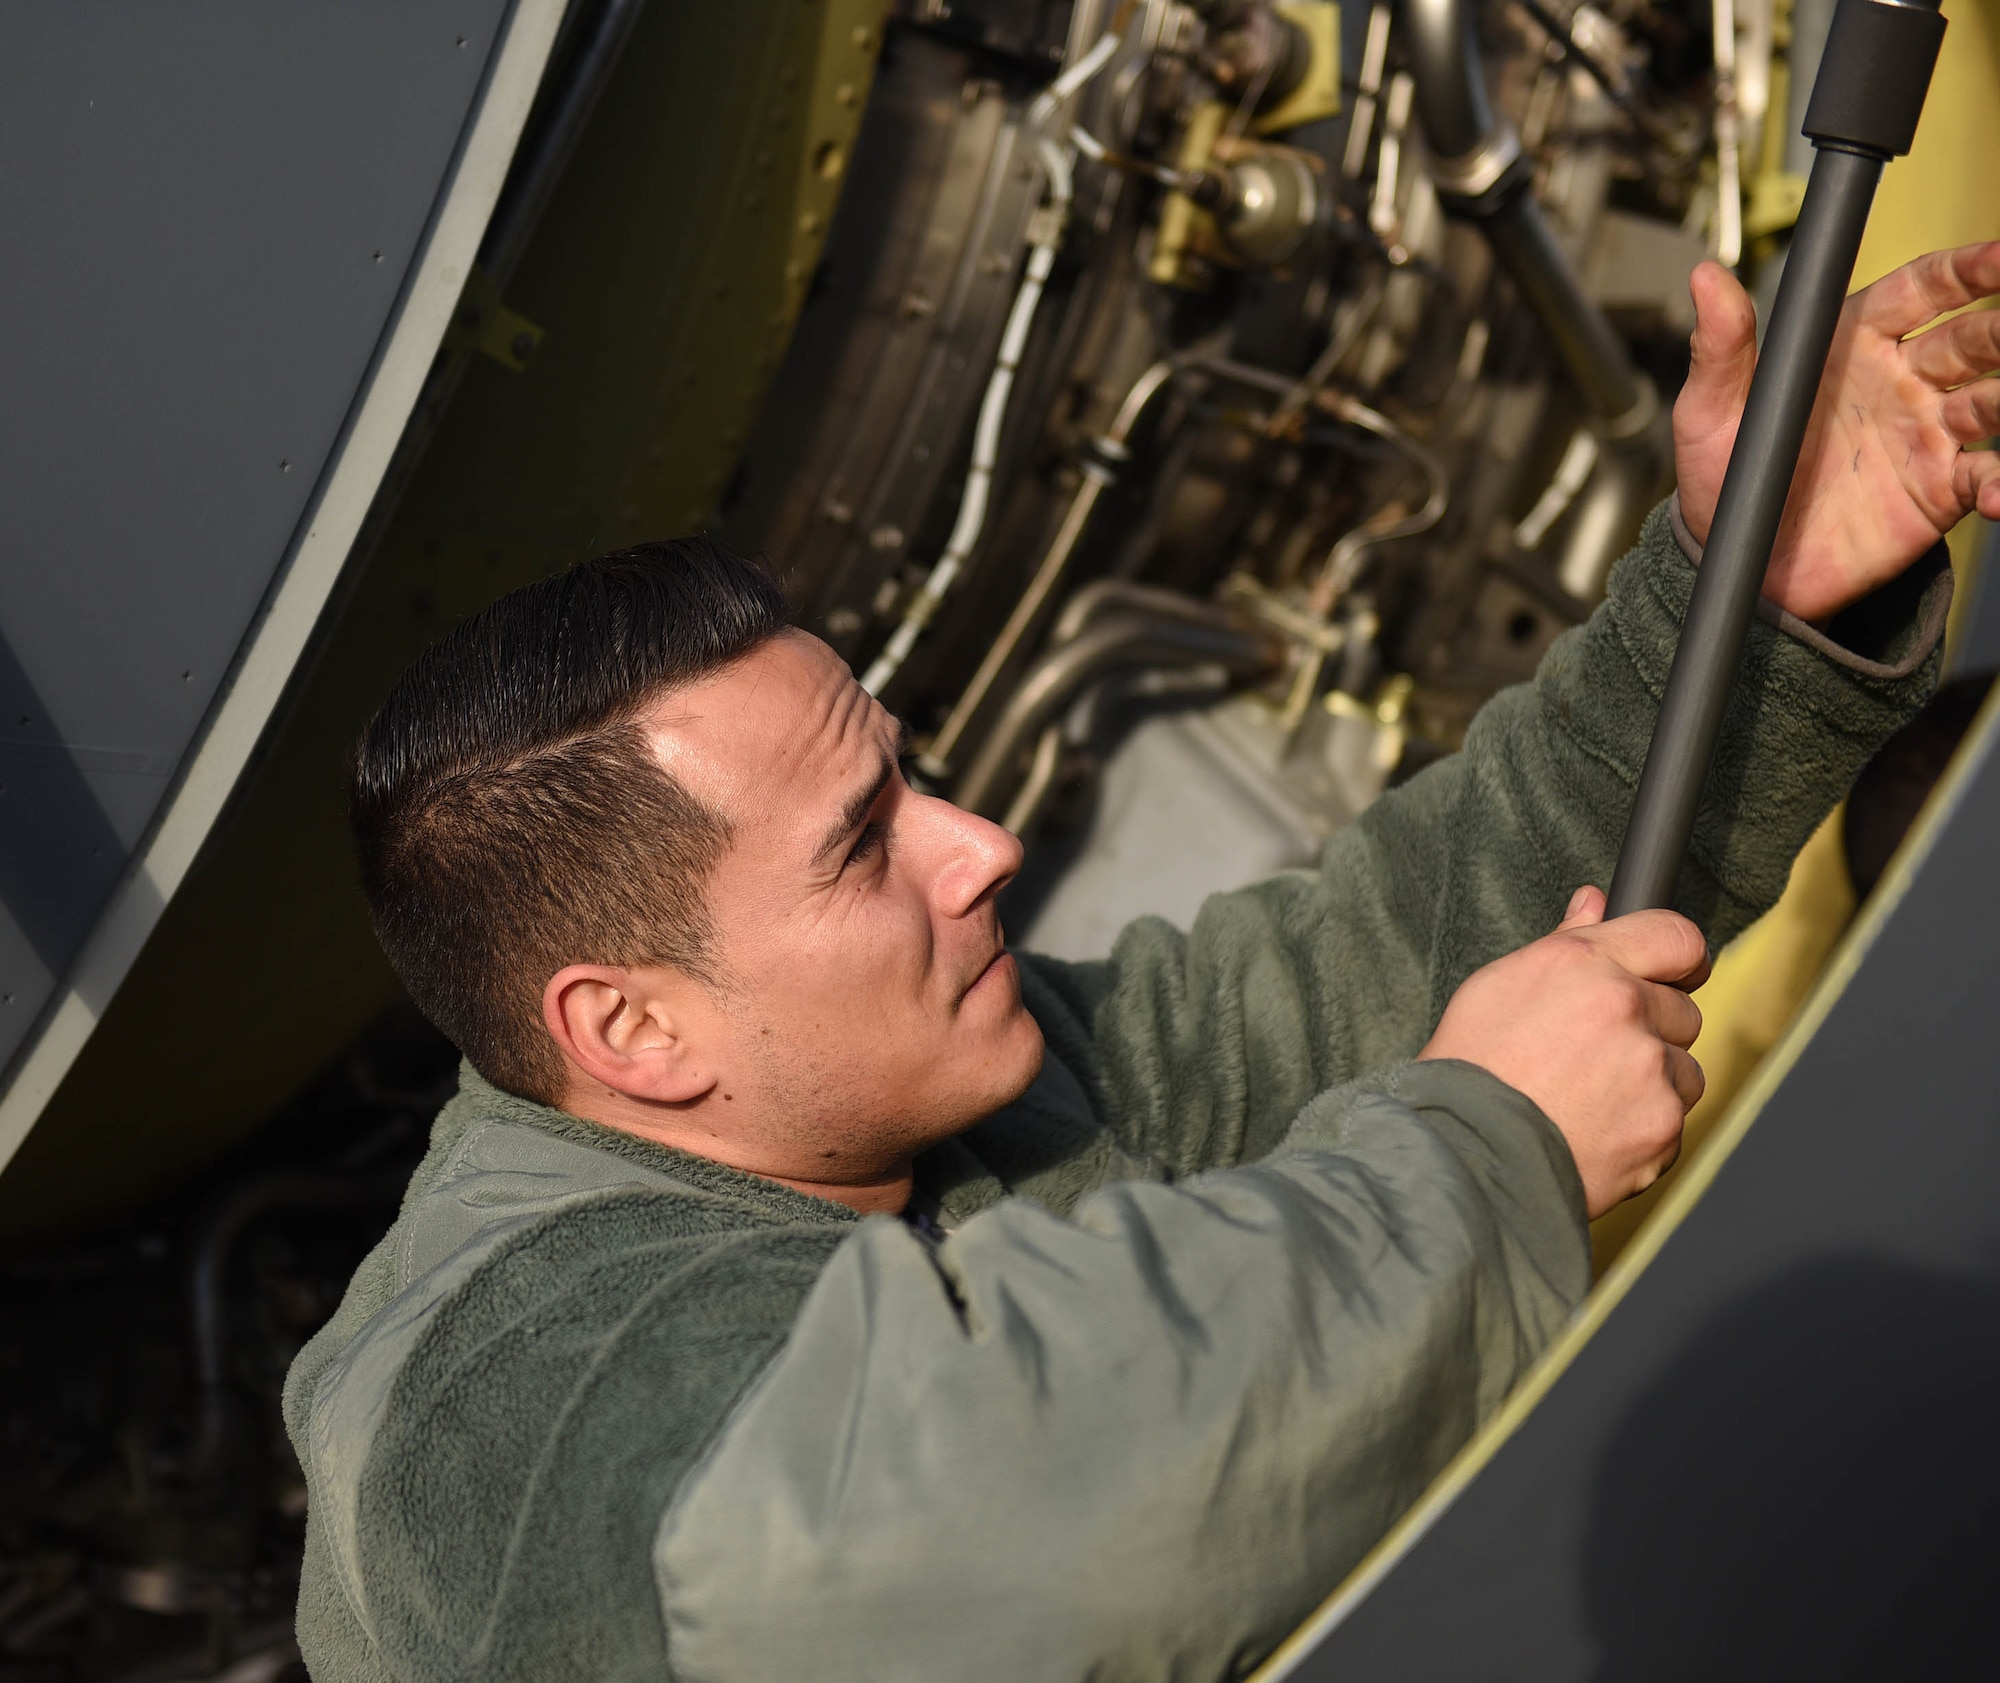 U.S. Air Force Tech. Sgt. Torrey Sanchez, 100th Aircraft Maintenance Squadron aerospace propulsion lead technician, closes a hatch on a KC-135 Stratotanker engine at RAF Mildenhall, England, Nov. 30, 2018. The aerospace propulsion shop maintains the engines, as well as conducts periodic inspections and unscheduled maintenance. (U.S. Air Force photo by Senior Airman Luke Milano)